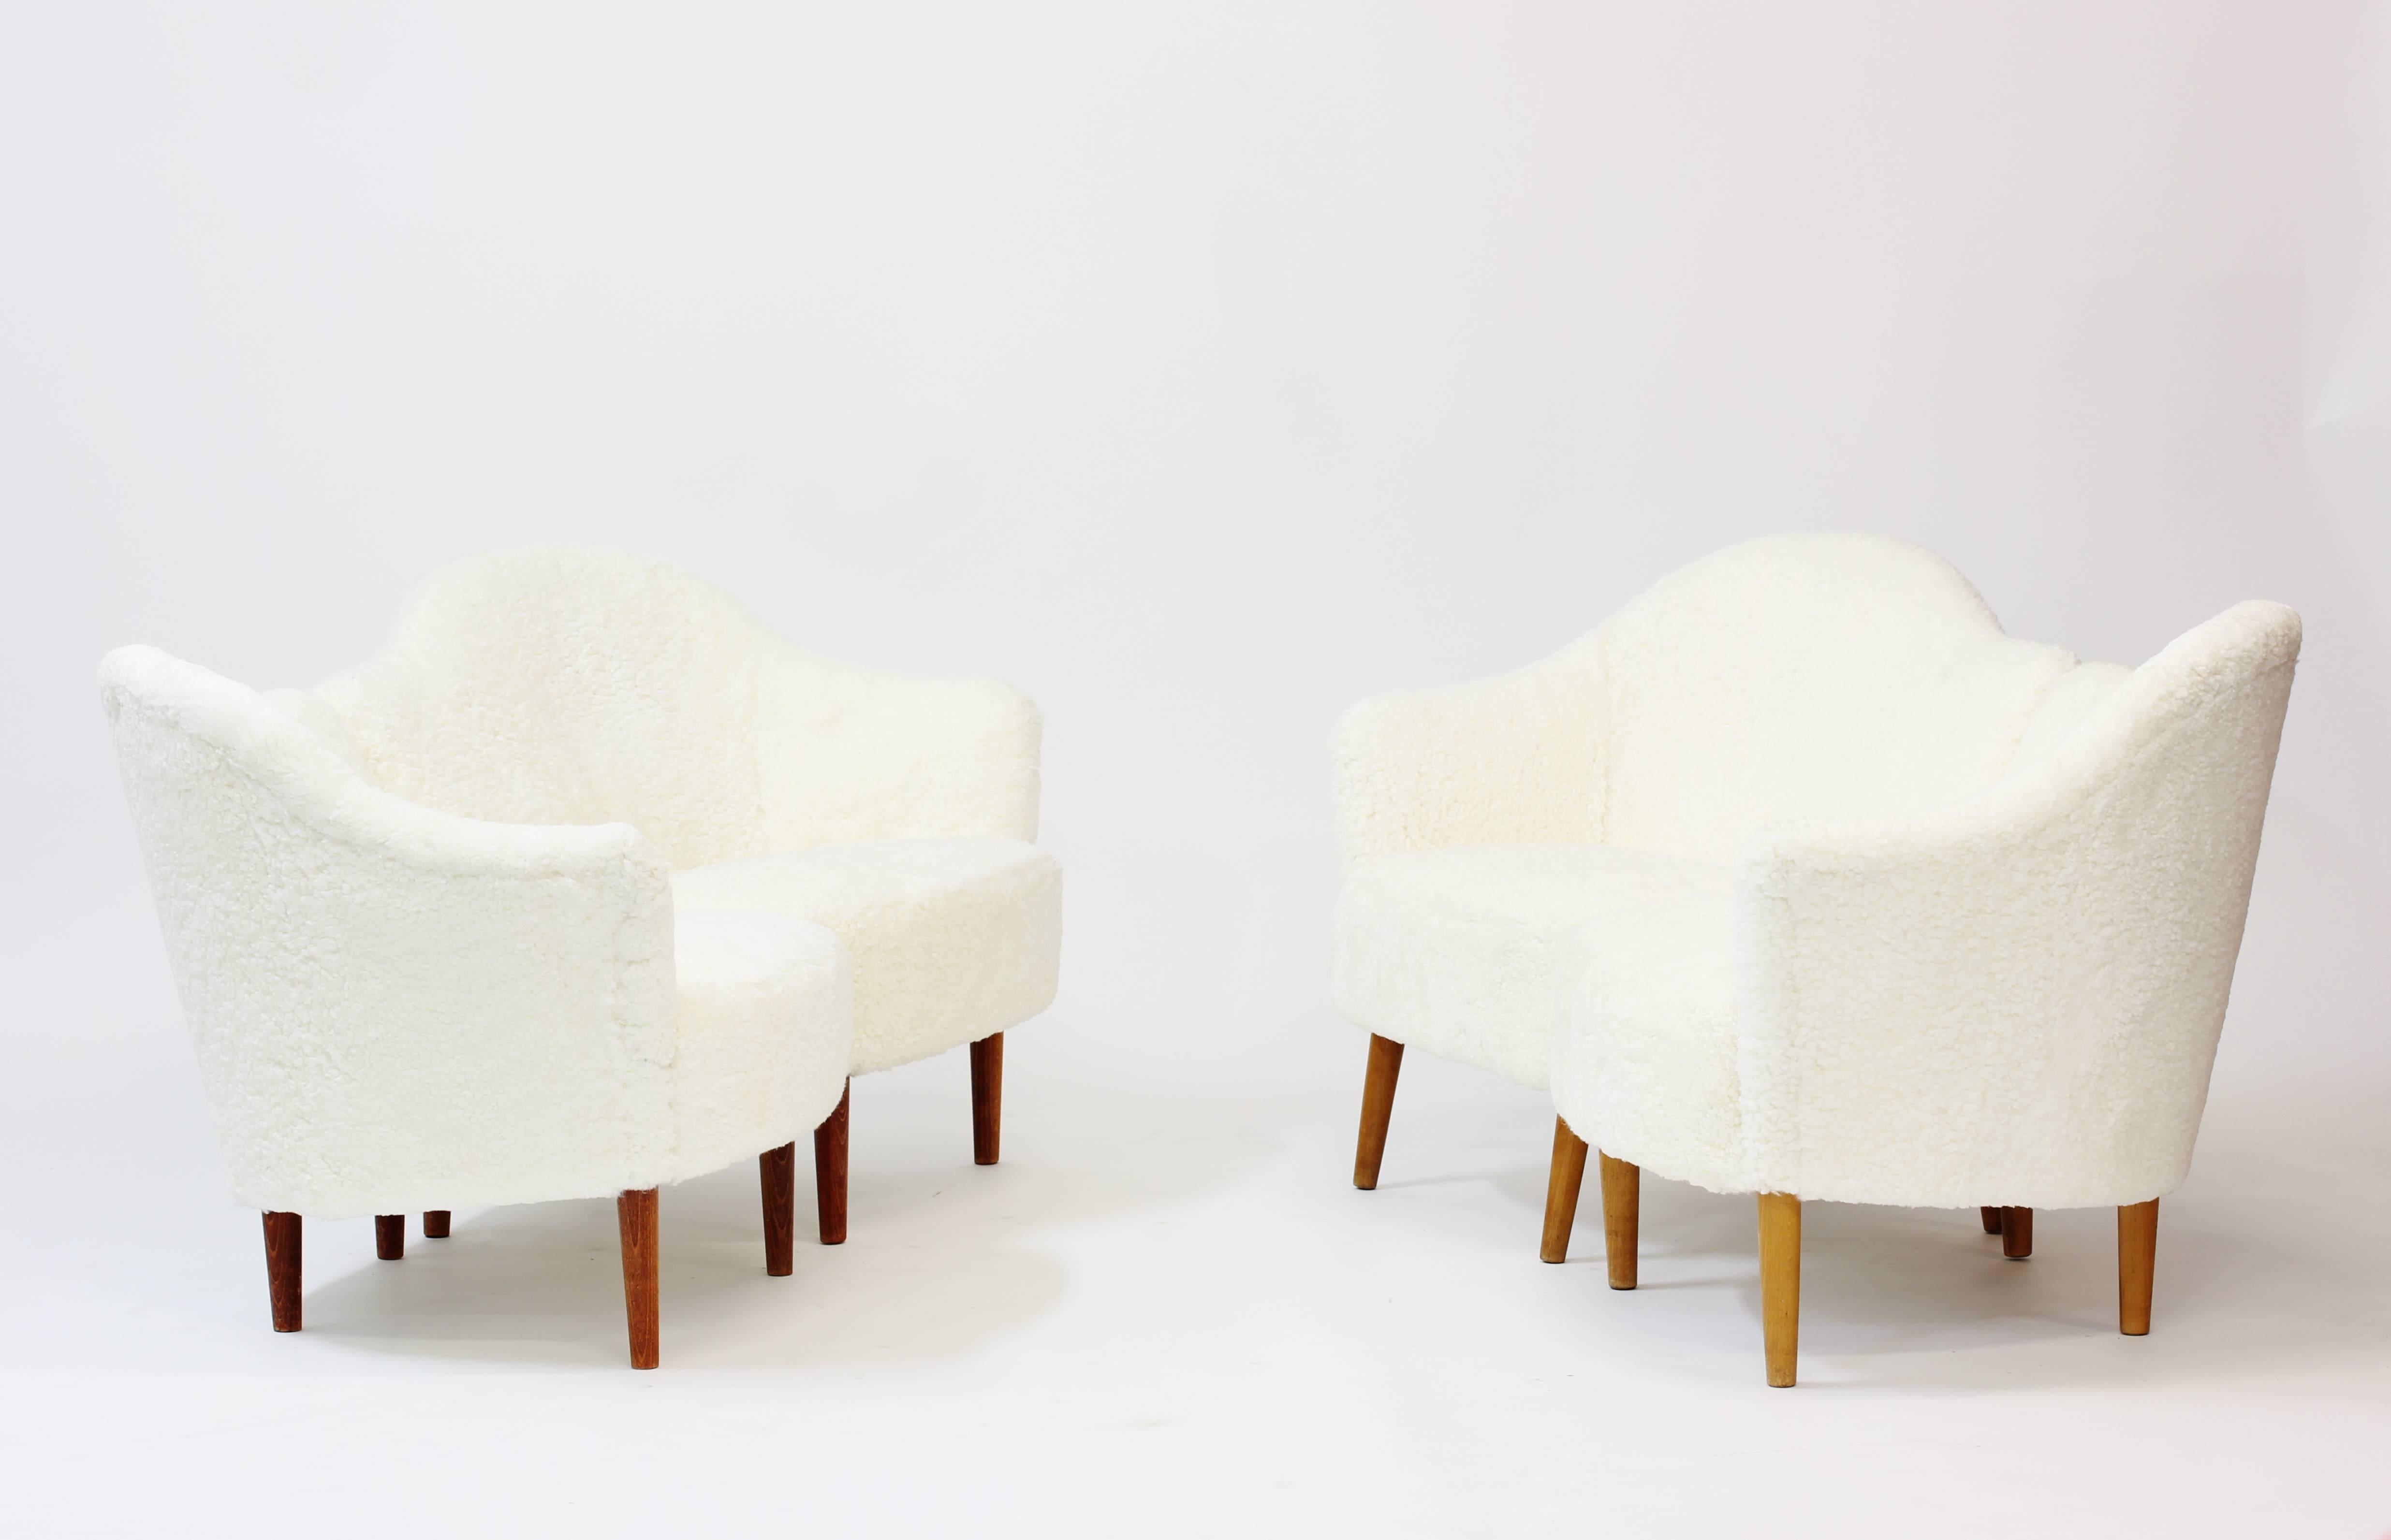 Lovely pair of Swedish 1950s easy chairs attributed to Carl Malmsten, similar to his Classic “Samspel” sofa. Makes a loveseat sofa when put together. Reupholstered in sheepskin.